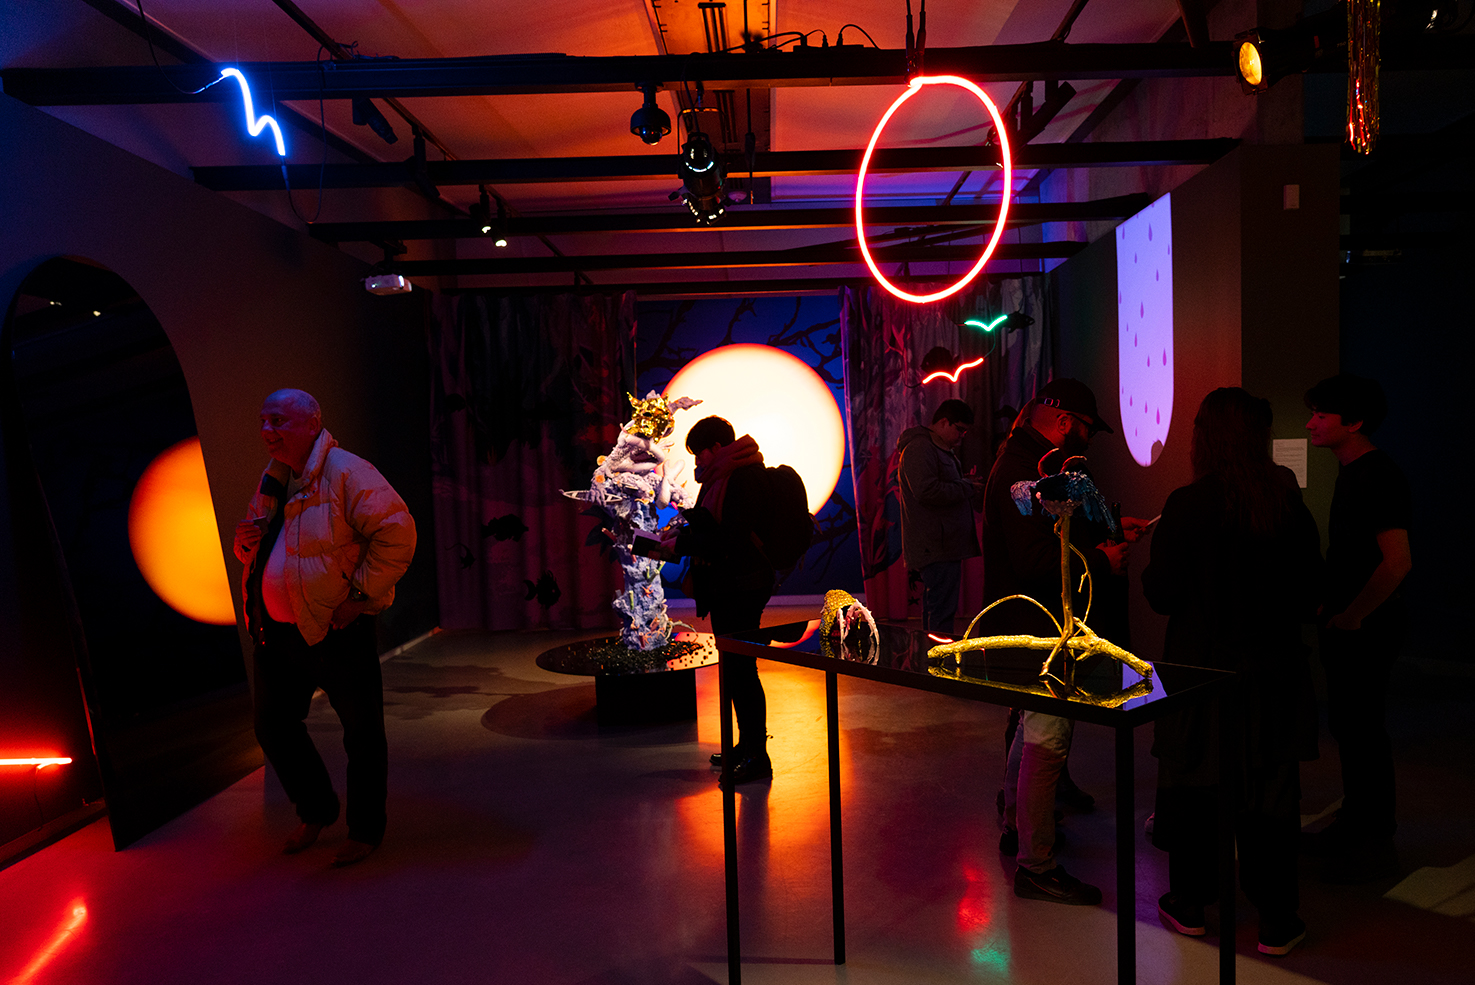 Dark room with people in foreground and works of art, neon light